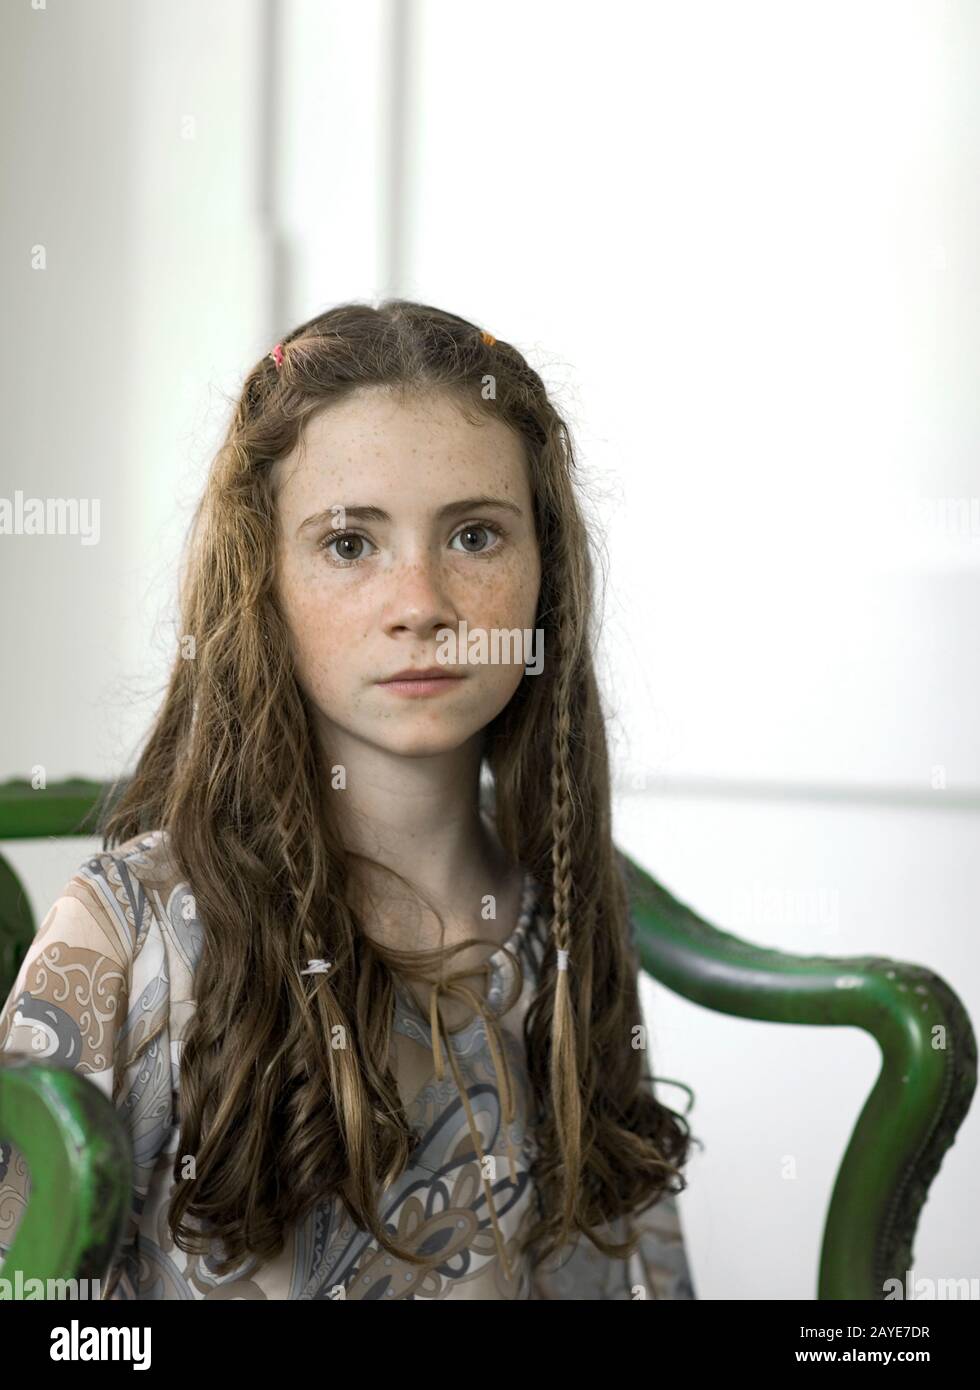 A pretty young girl with freckles and pigtails sitting in an antique green armchair. Stock Photo